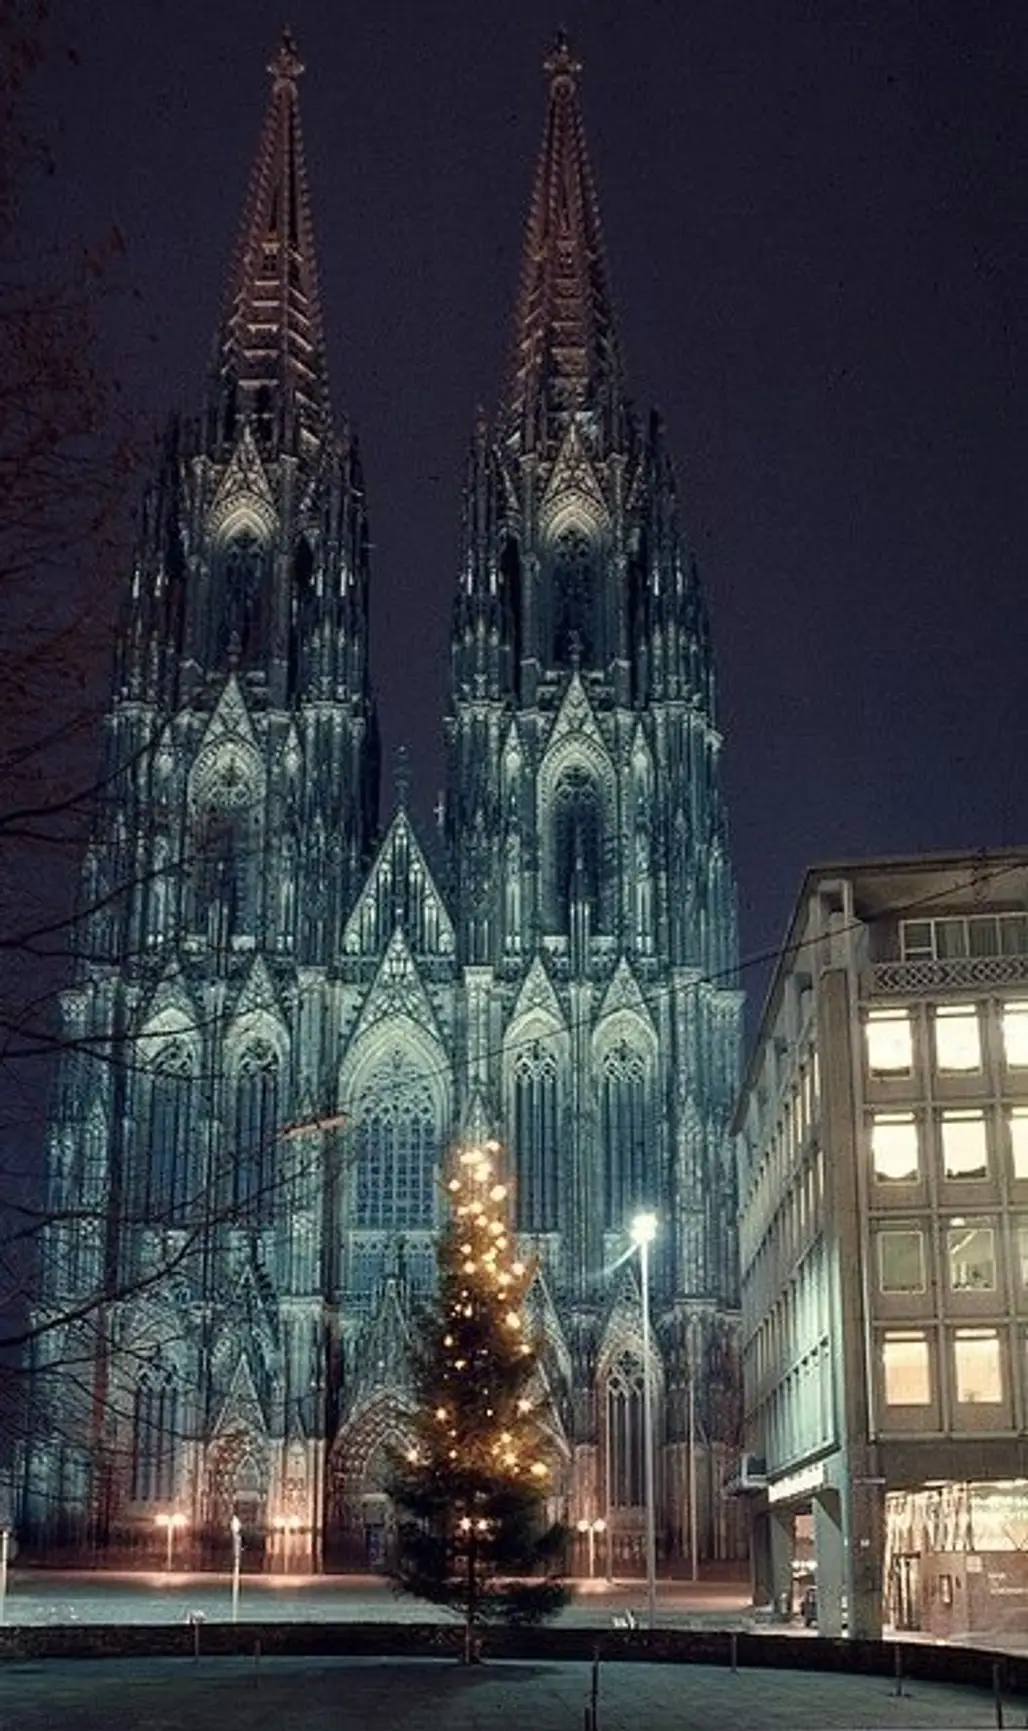 Christmas in Cologne, Germany